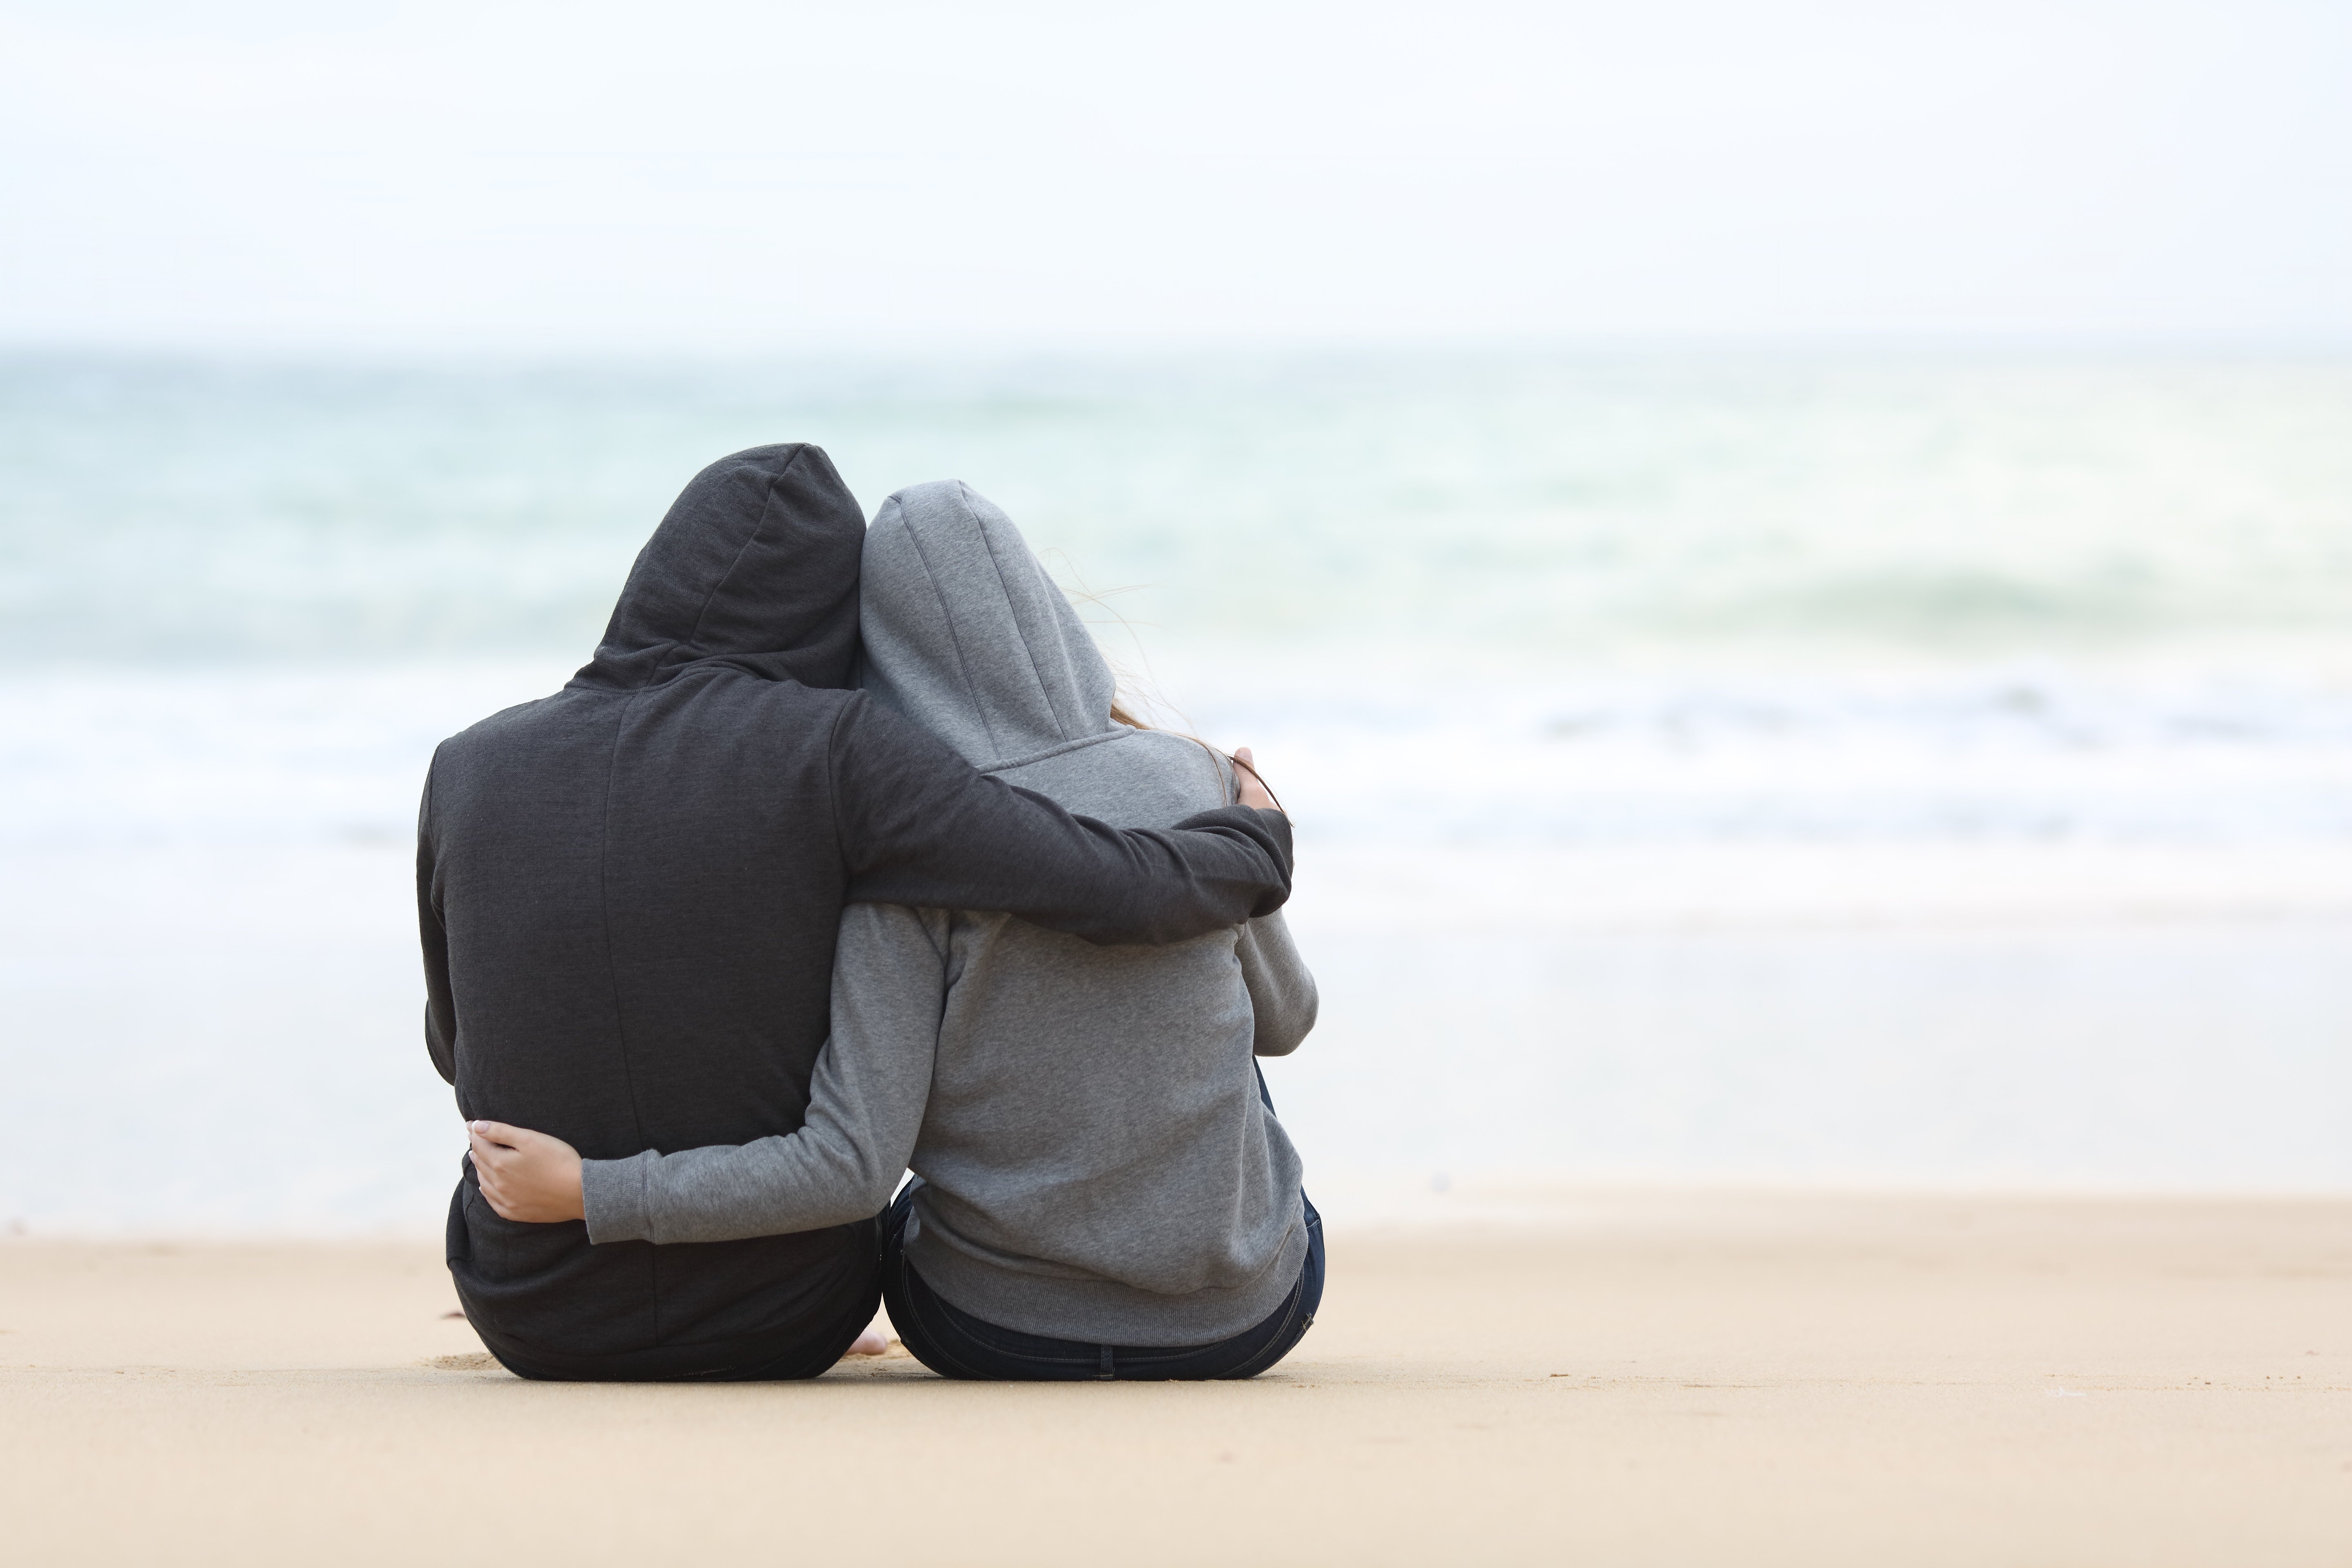 A rear view of two people hugging and watching the sea while sitting on the beach sand on a rainy day | Source: Shutterstock